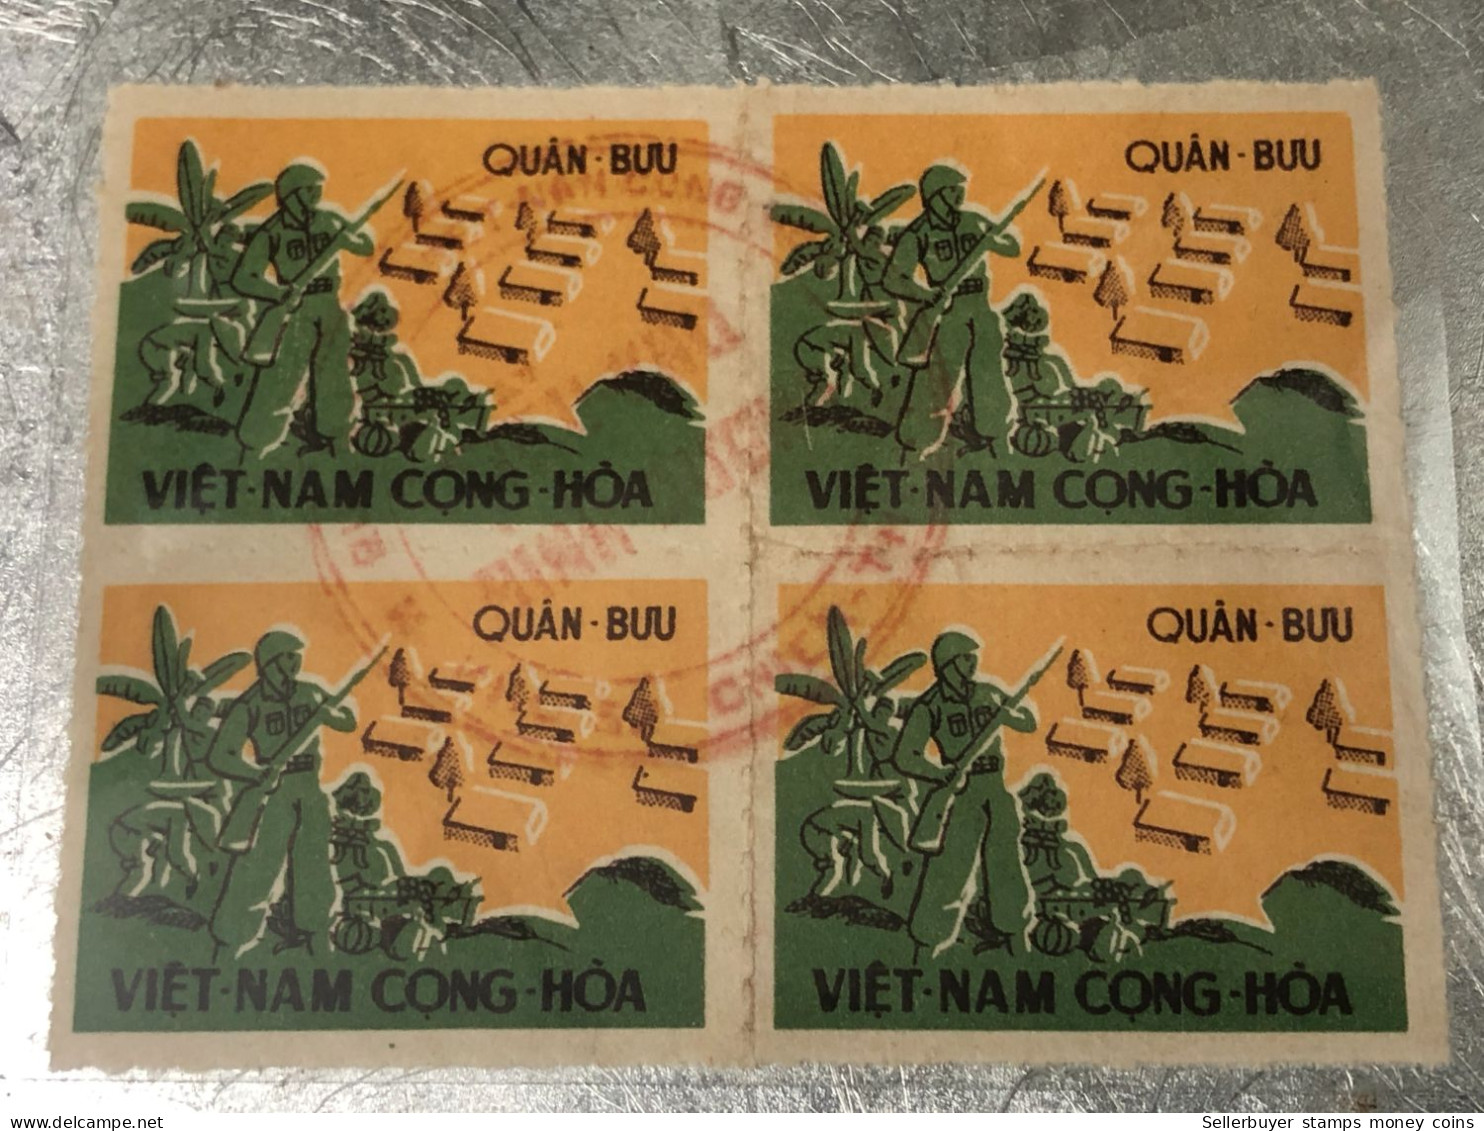 SOUTH VIETNAM 1960 Military Post Admission Stamp U/M Marginal Block Of 4 VARIETY Stamps Are Piled With Marks- Vyre Rare - Vietnam